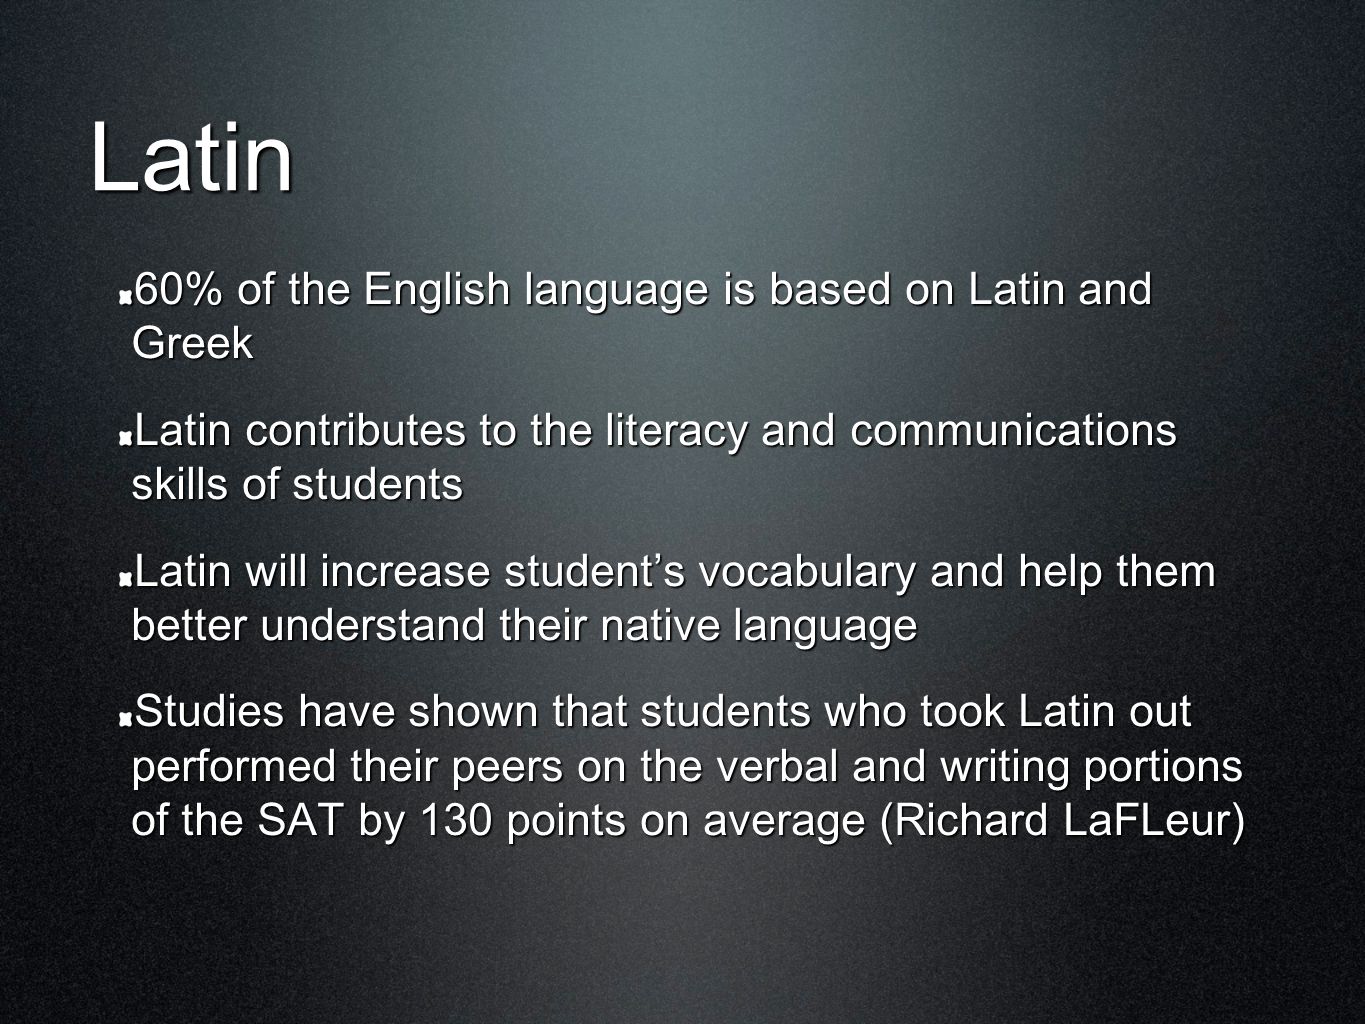 Latin 60% of the English language is based on Latin and Greek Latin contributes to the literacy and communications skills of students Latin will increase student’s vocabulary and help them better understand their native language Studies have shown that students who took Latin out performed their peers on the verbal and writing portions of the SAT by 130 points on average (Richard LaFLeur)